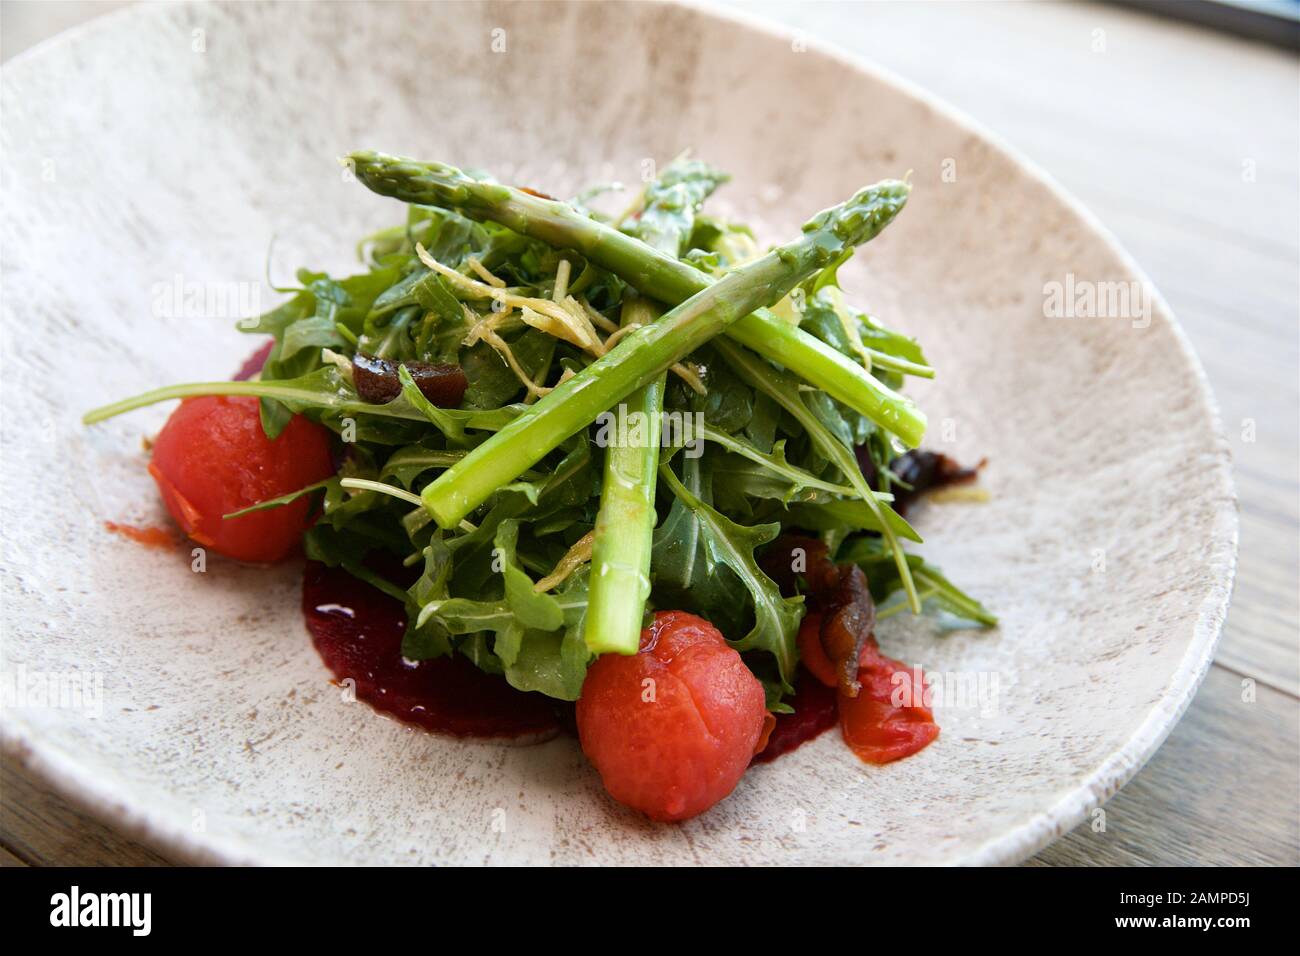 Beetroot and tomato salad with rocket and asparagus. Stock Photo